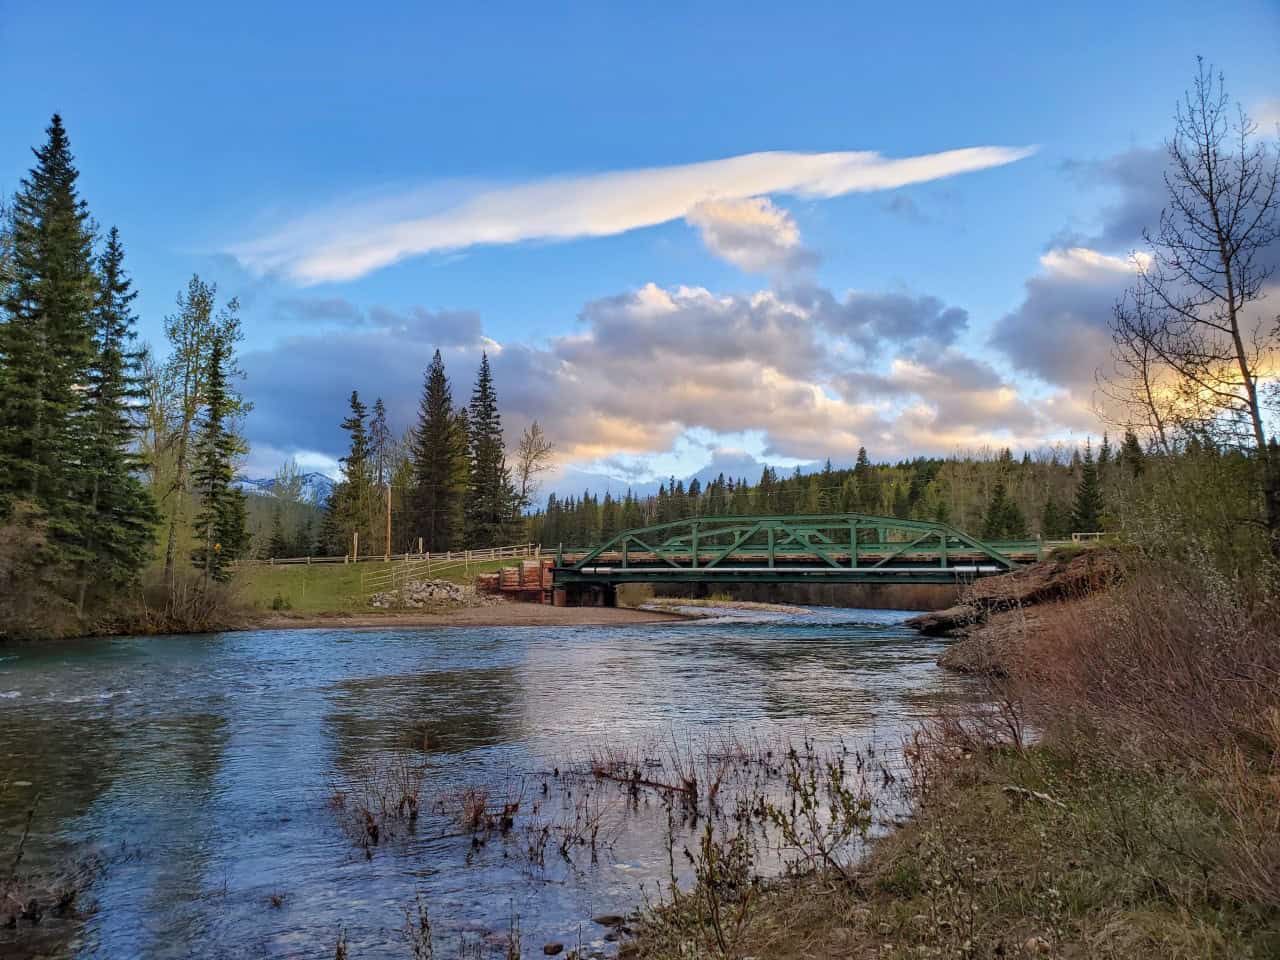 The Infamous Bridge on Castle River in Alberta Canada - Thr gorgeous scenery surrounding Castle River Bridge Campground. You see where it gets its name from 